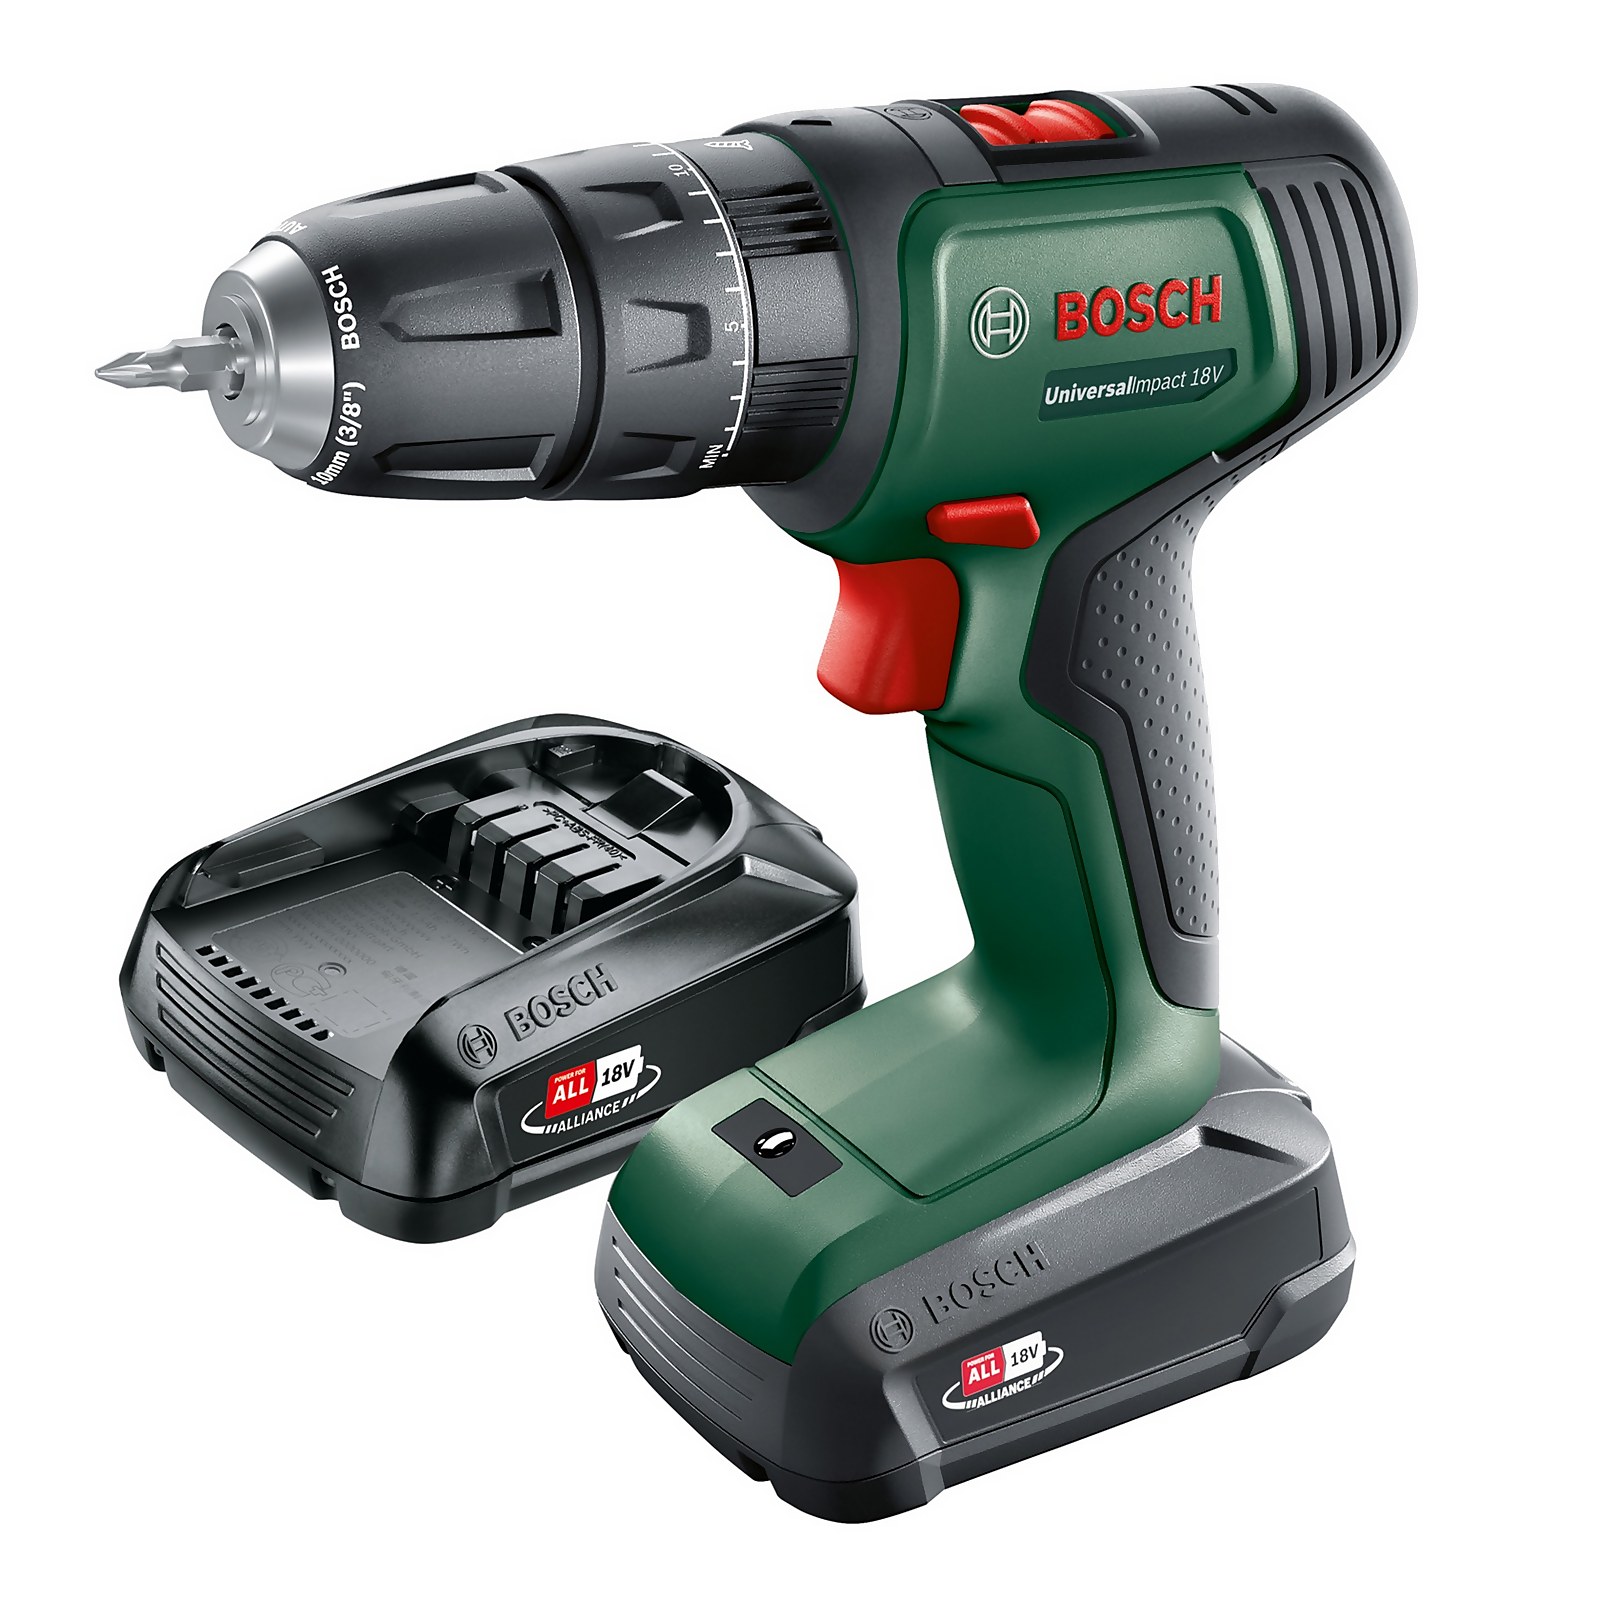 Photo of Bosch Universalimpact 18v Combi Drill With 2x 1.5ah Batteries & Charger